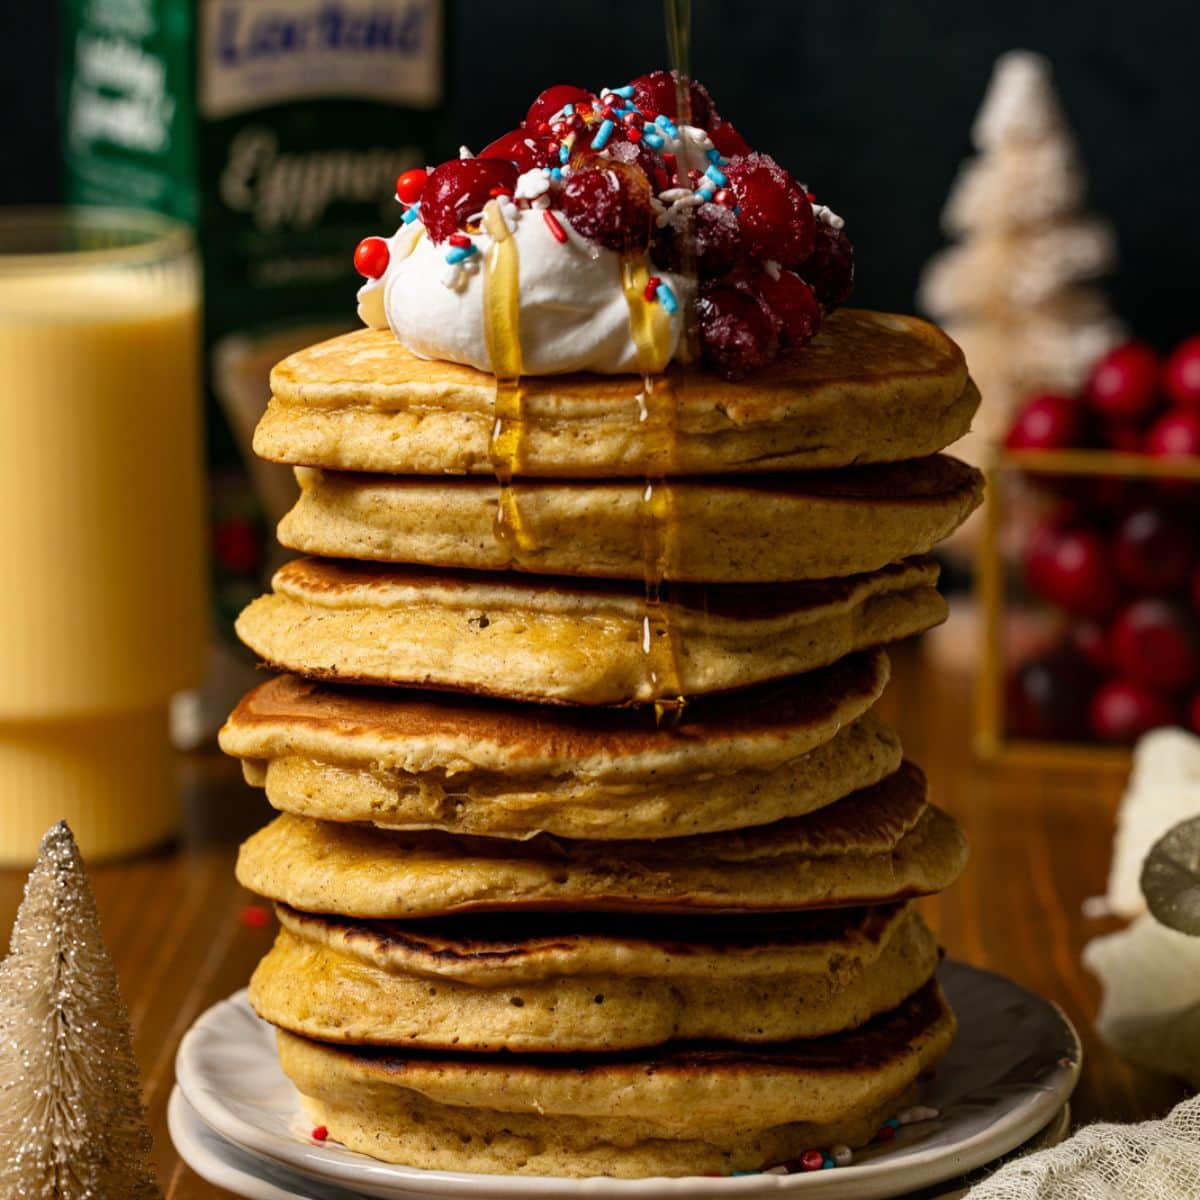 Pancakes with syrup and eggnog in background.